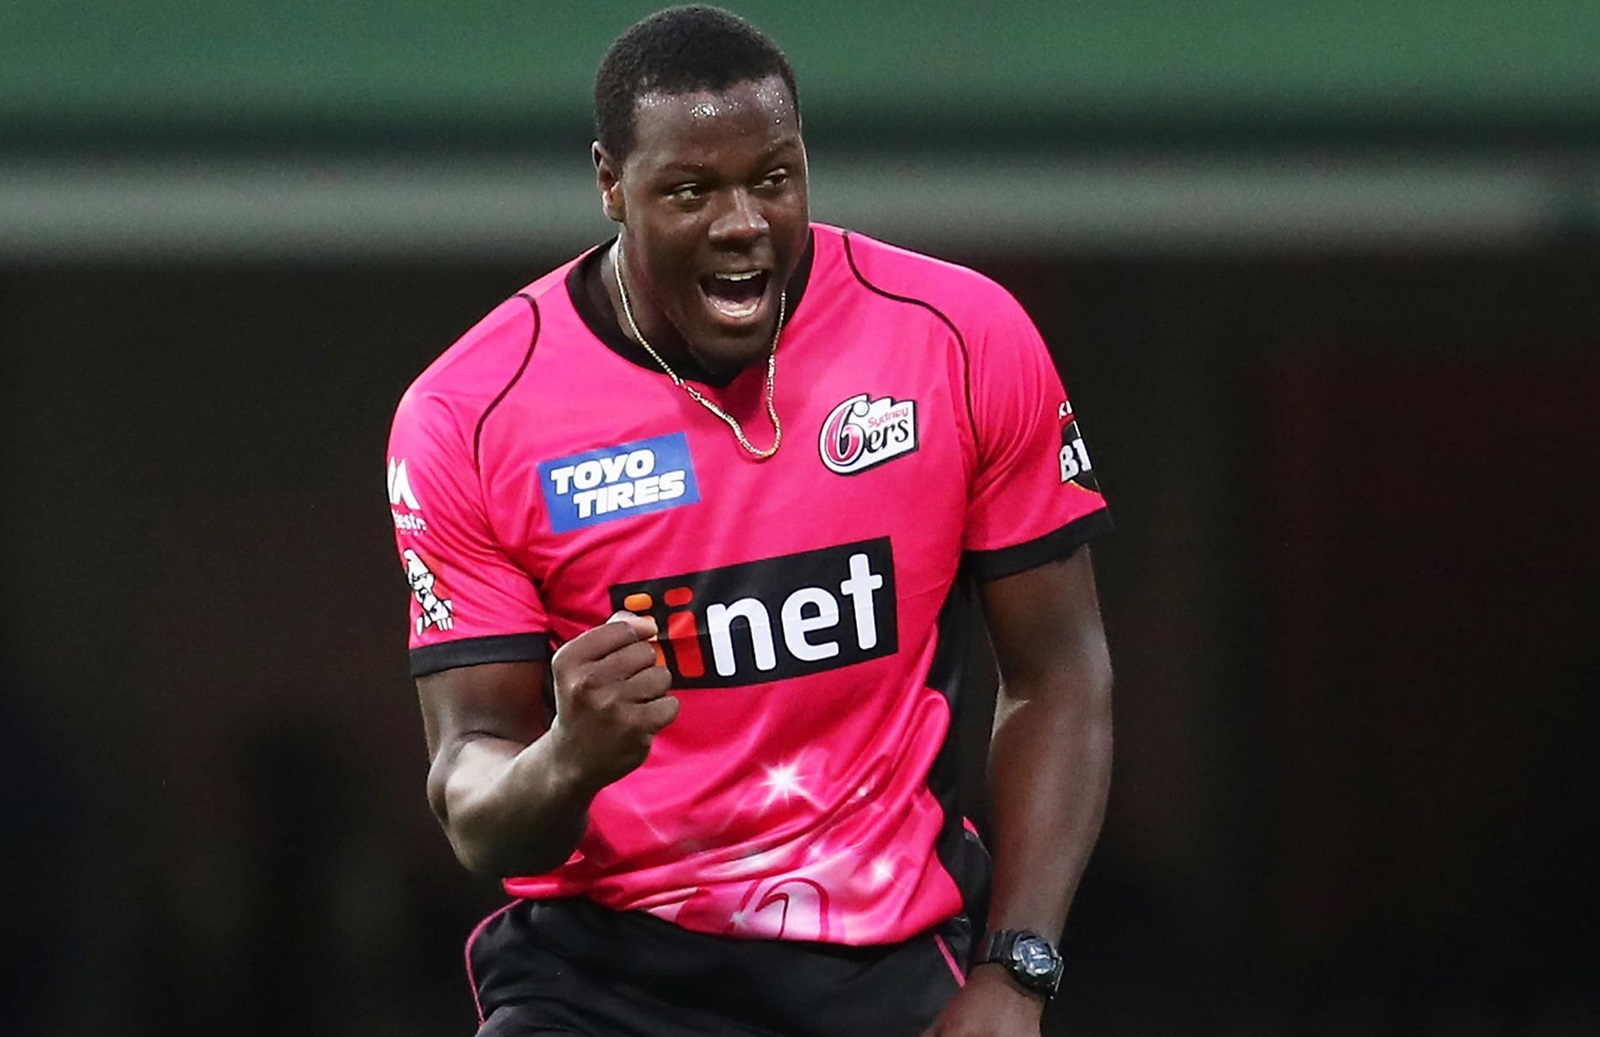 BBL: Carlos Brathwaite inks deal with defending champs Sydney Sixers